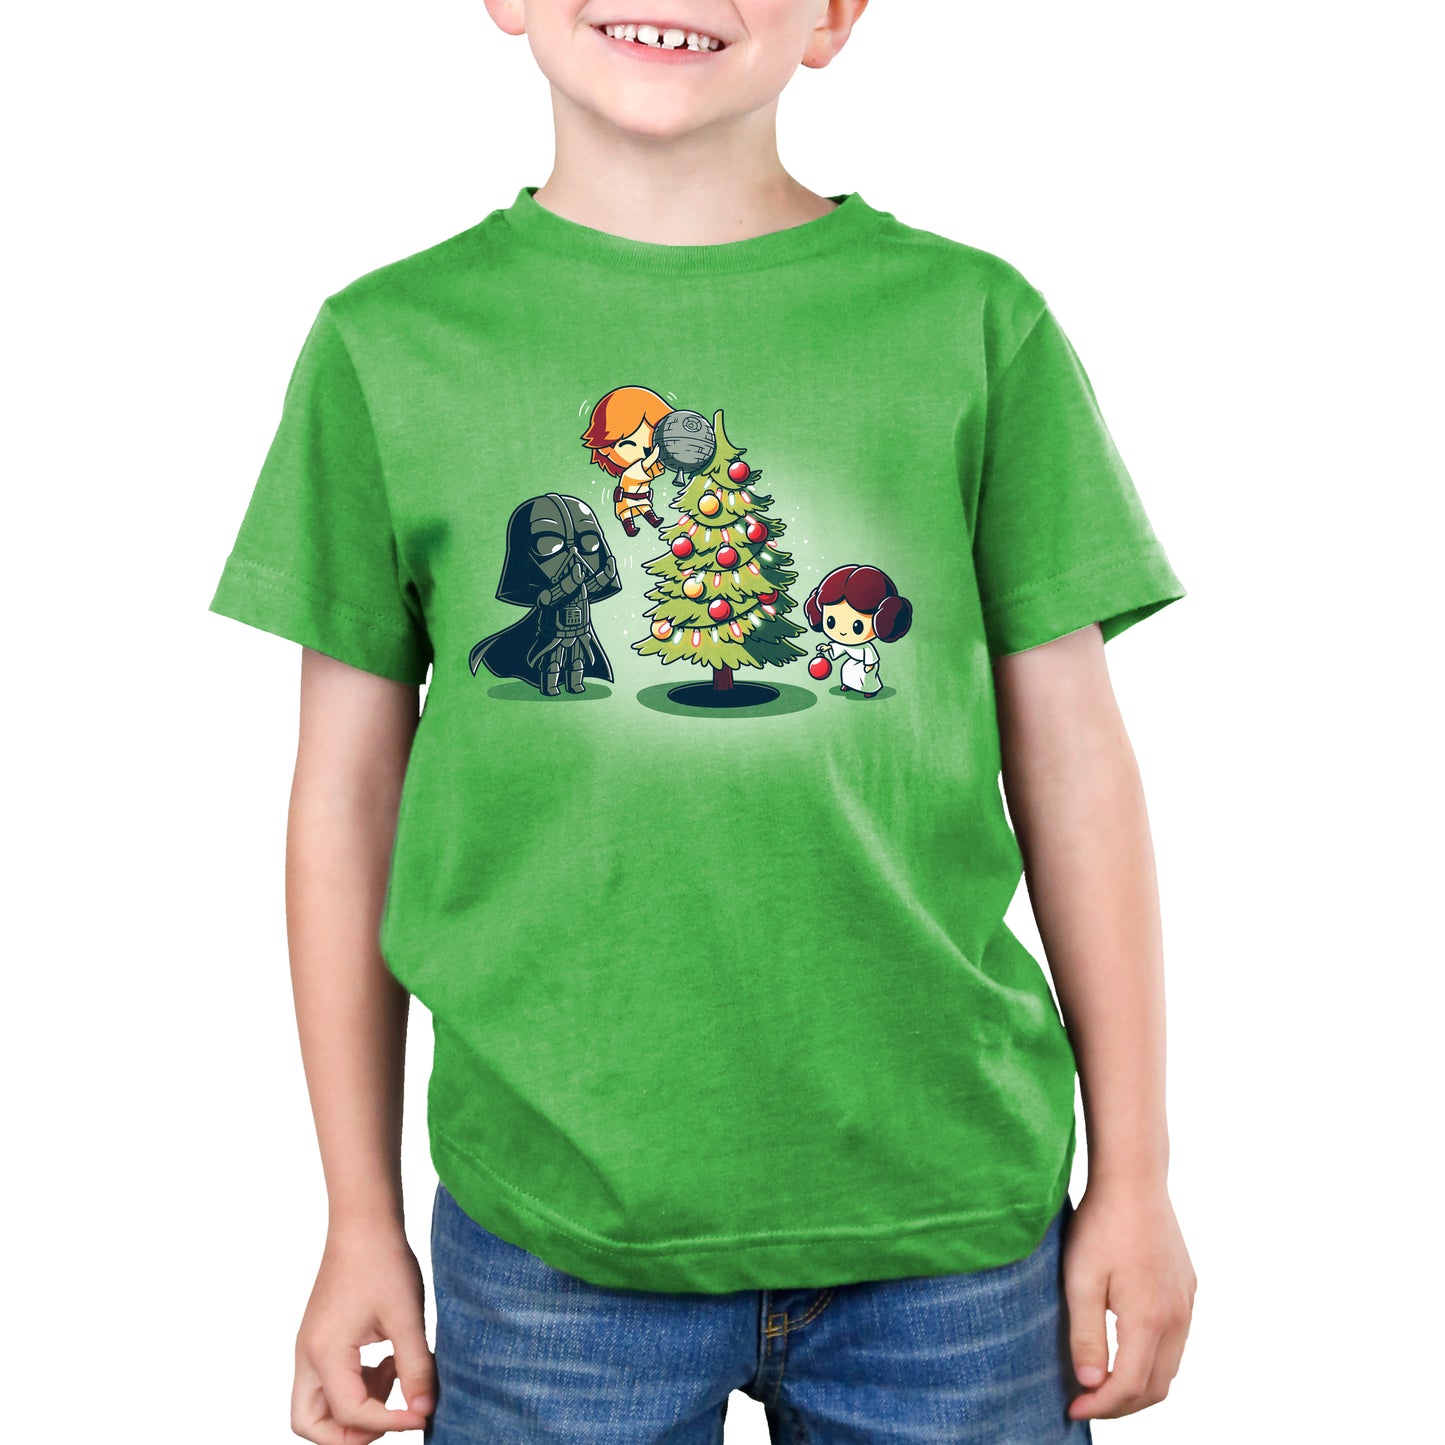 A young boy wearing an officially licensed Star Wars Skywalker Family Christmas t-shirt with a Star Wars Christmas tree.